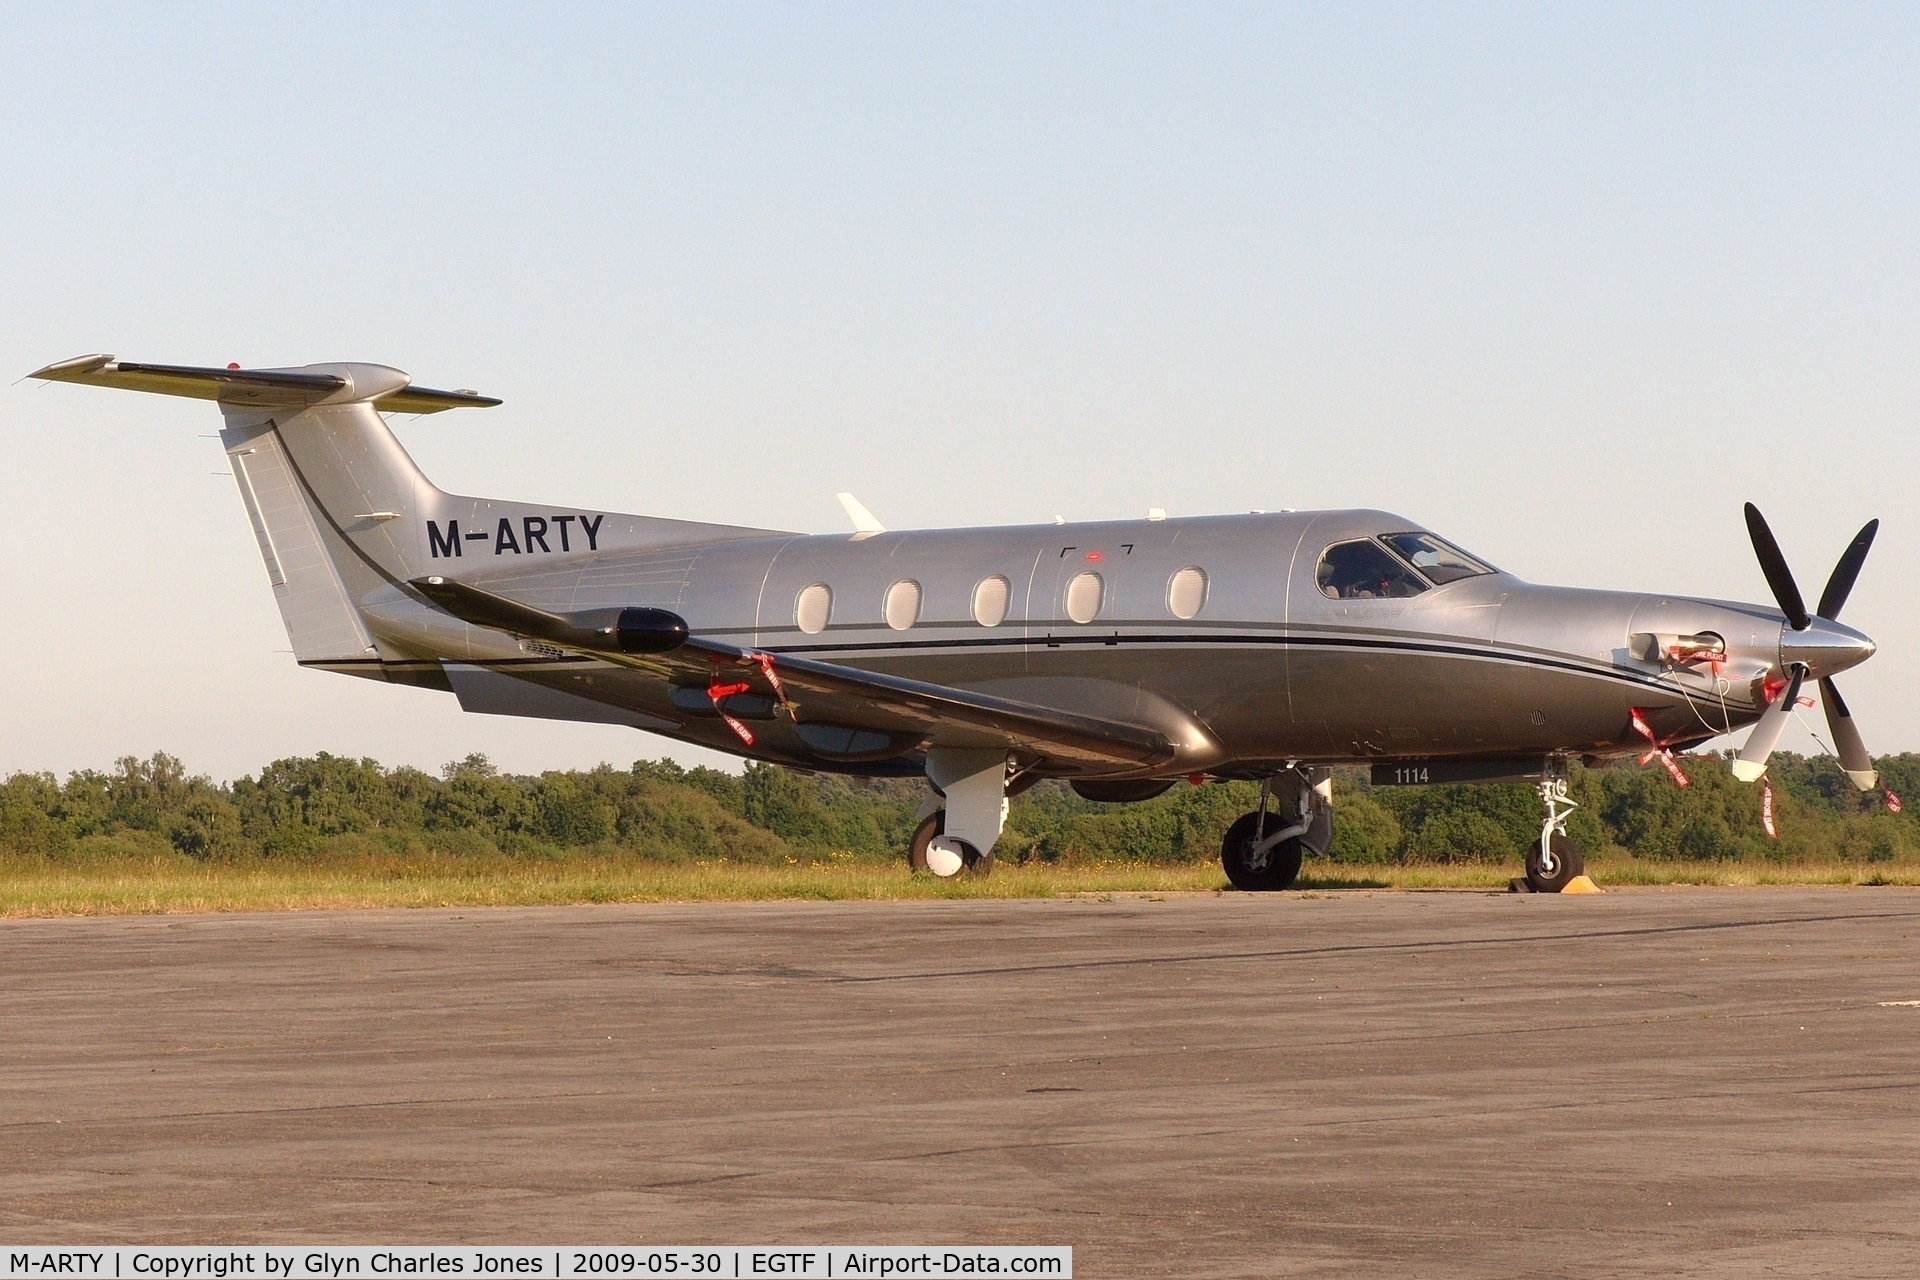 M-ARTY, 2009 Pilatus PC-12/47E C/N 1114, Previously HB-FQN. Owned by Creston (UK) Ltd.